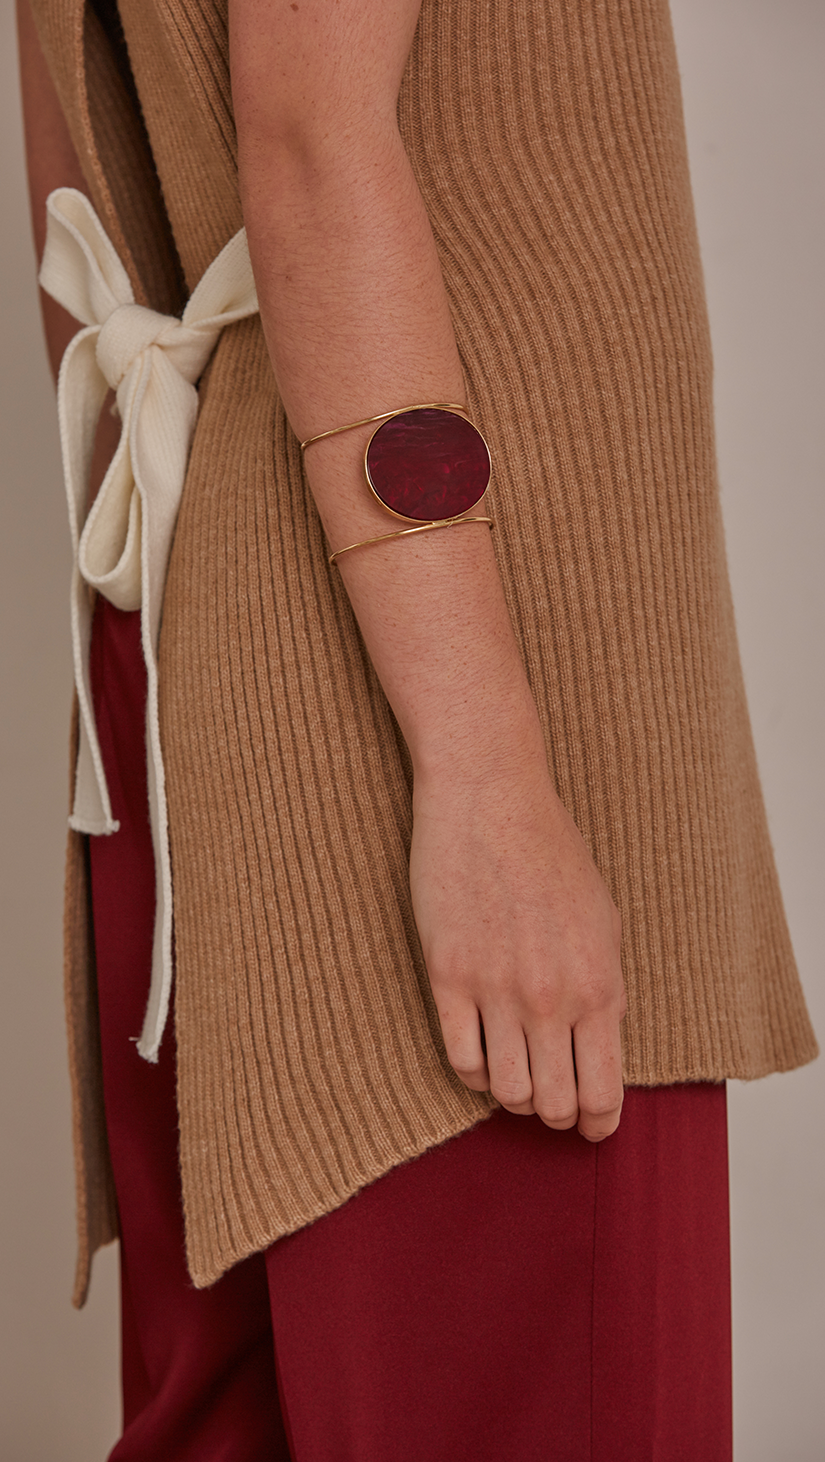 Claudé Bracelet, gold plating cuff with free moving burgundy marble discus circle.